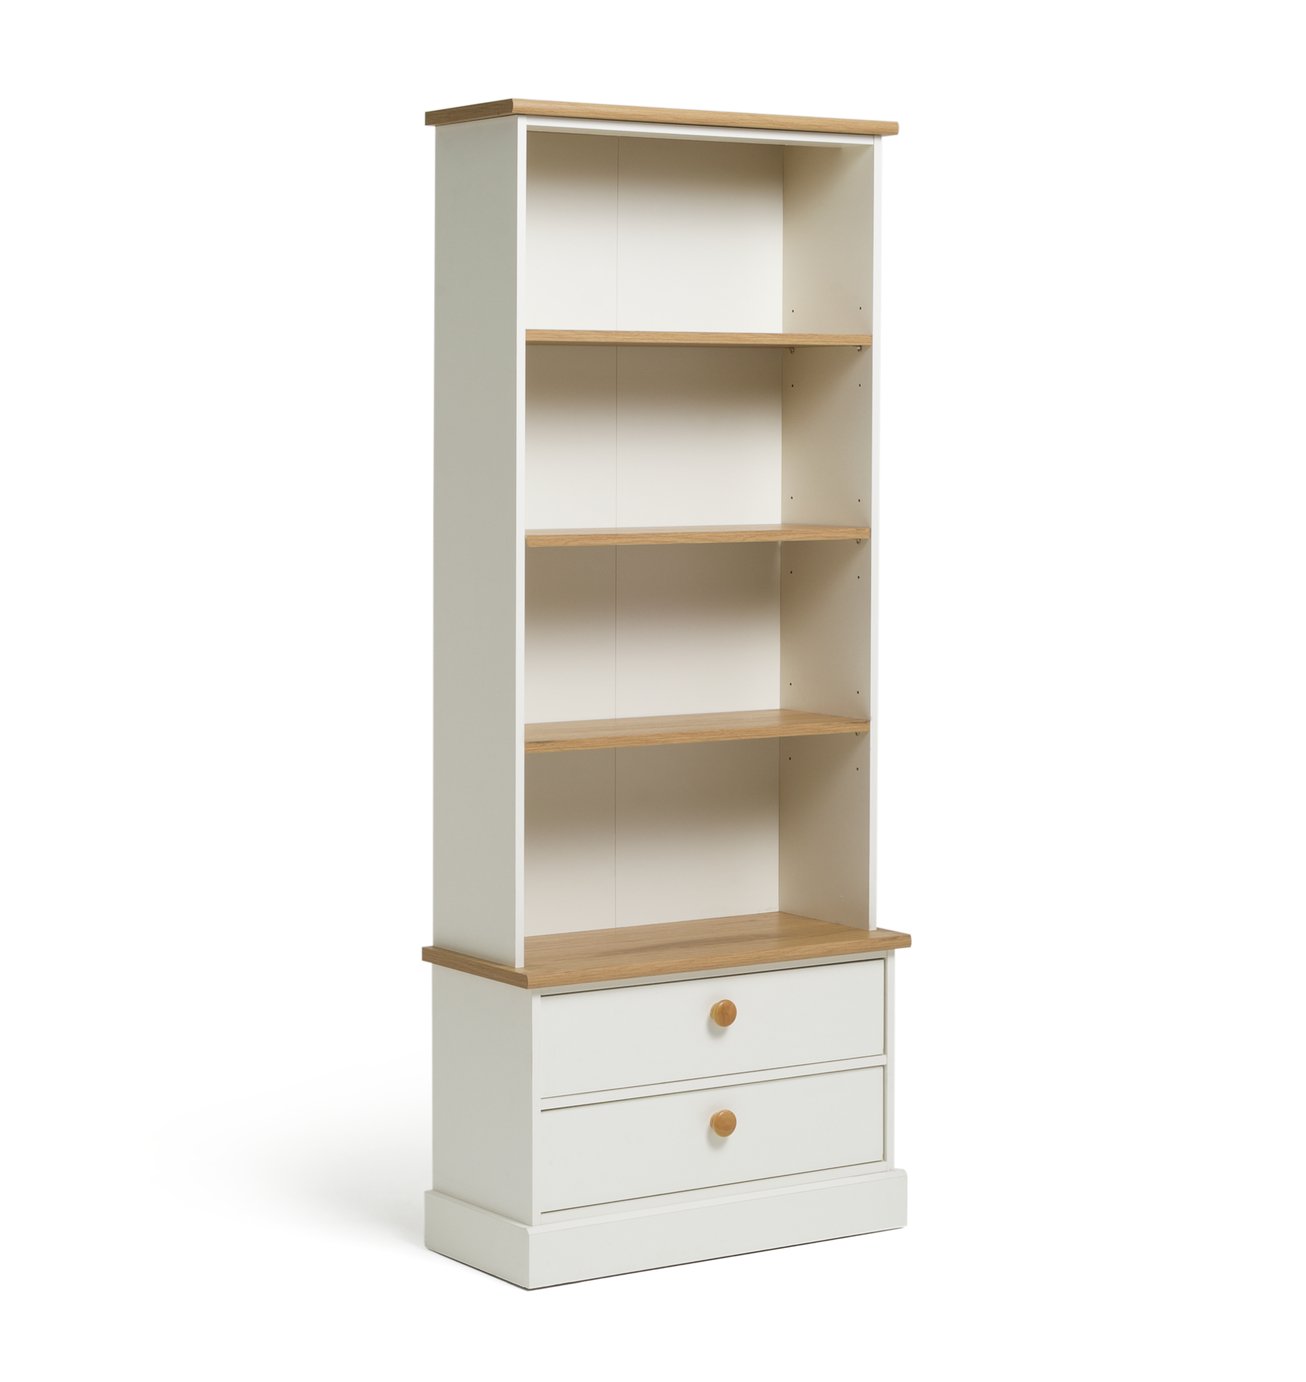 Habitat Winchester Bookcase and Display Cabinet - White